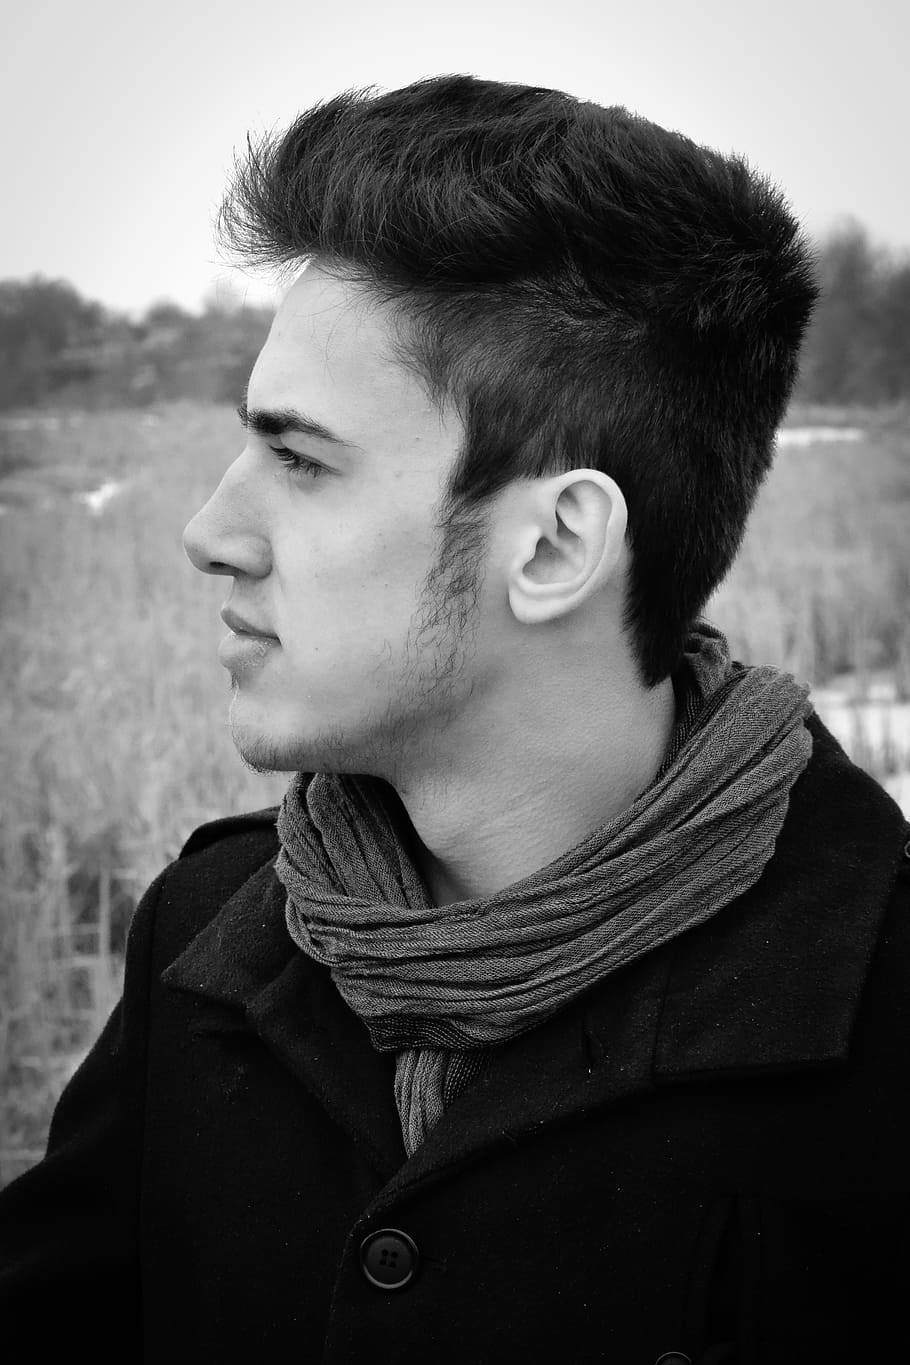 young man, profile man, dream, boy, black and white, one person, young adult, headshot, lifestyles, real people